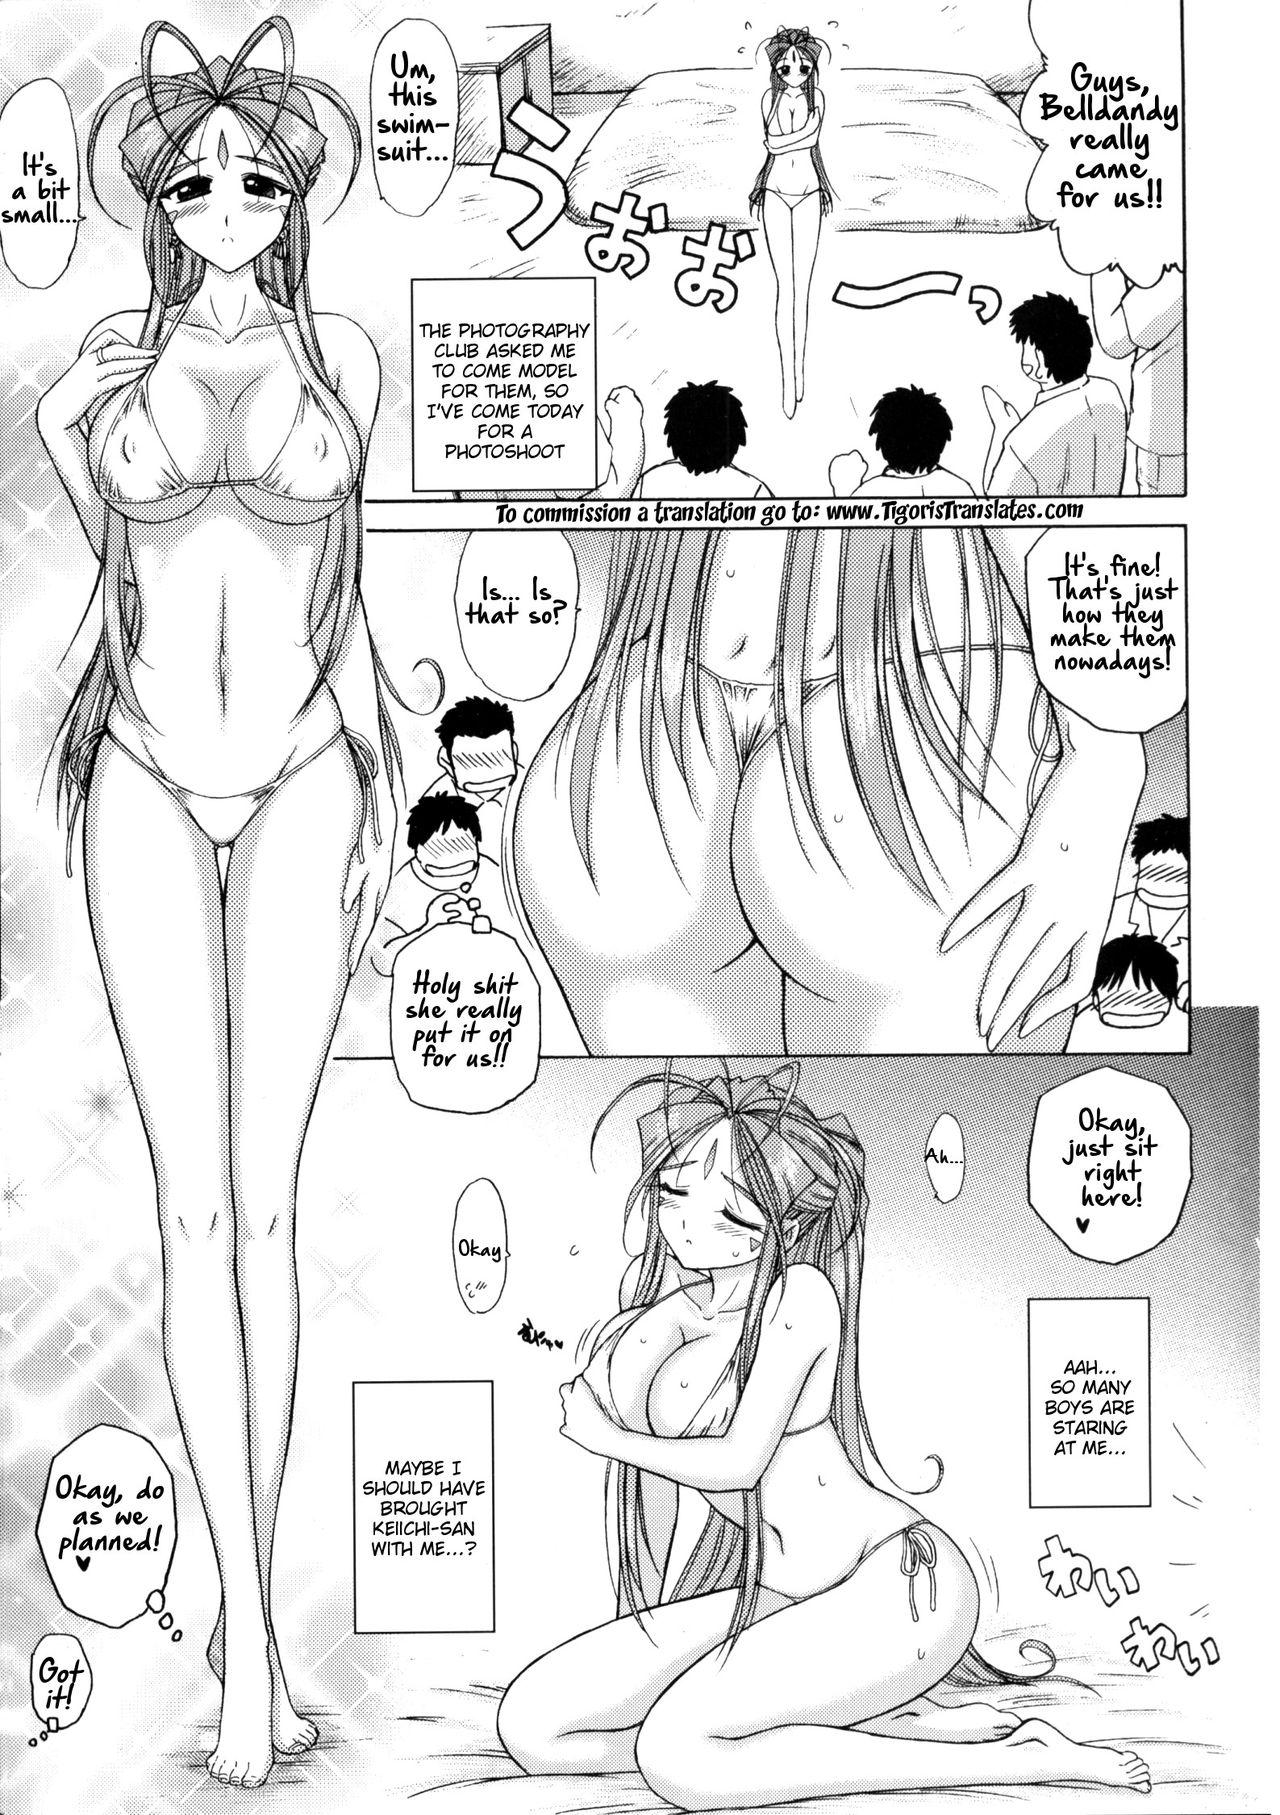 Nice Tits Submission Sailormoon After/Midgard - Sailor moon Ah my goddess Fuck Pussy - Page 12